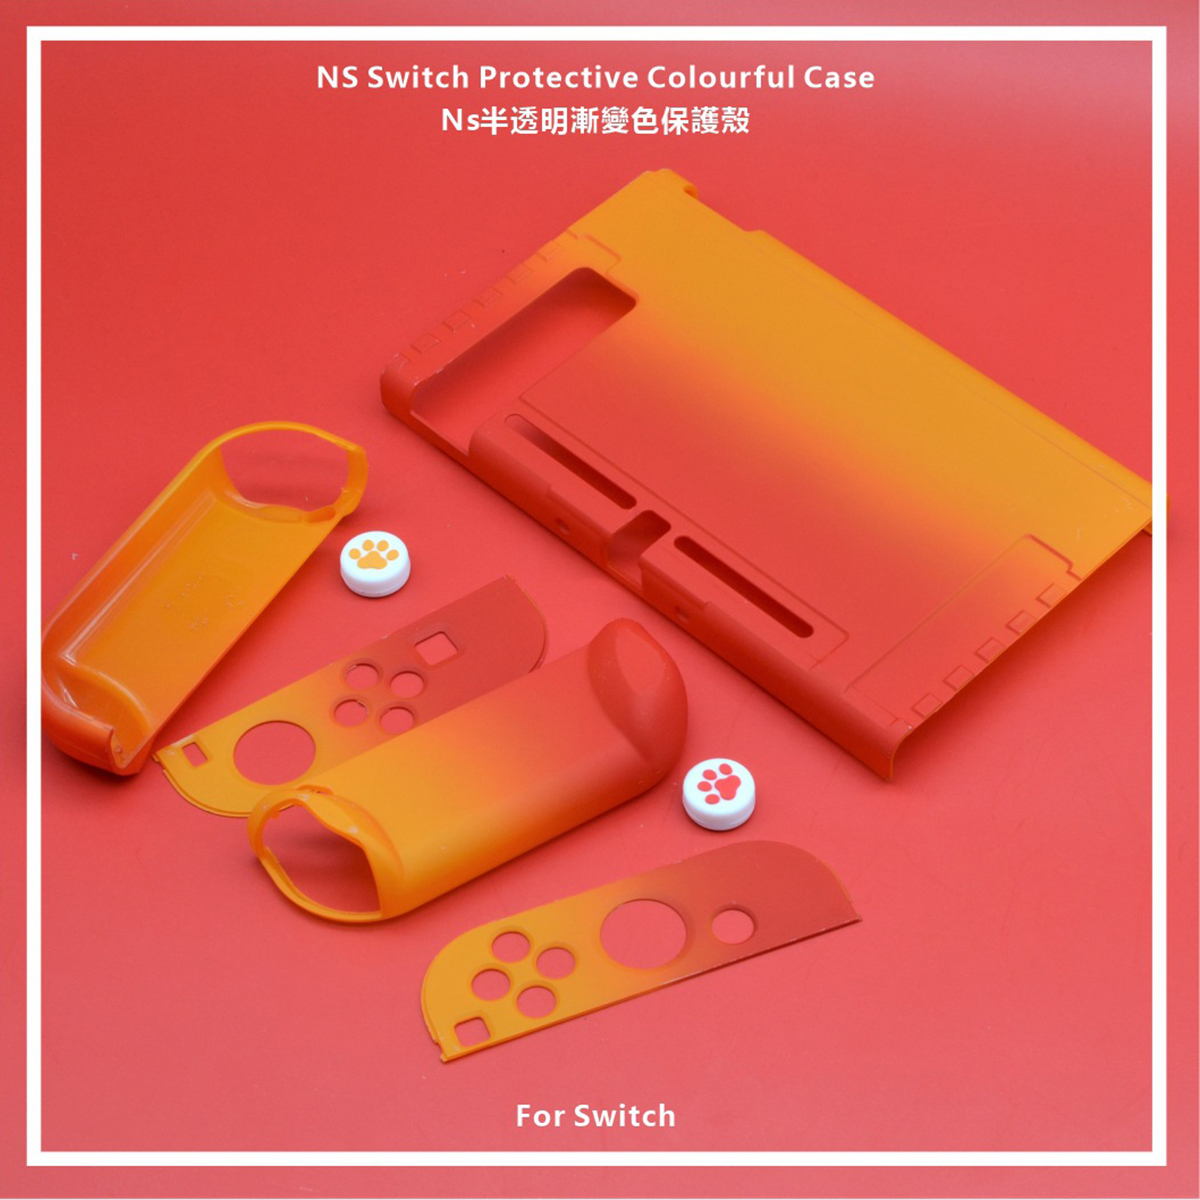 Colorful-Shockproof-Shell-Gradient-Case-Protector-for-Nintendo-Switch-Game-Console-Protective-Hard-C-1737853-4